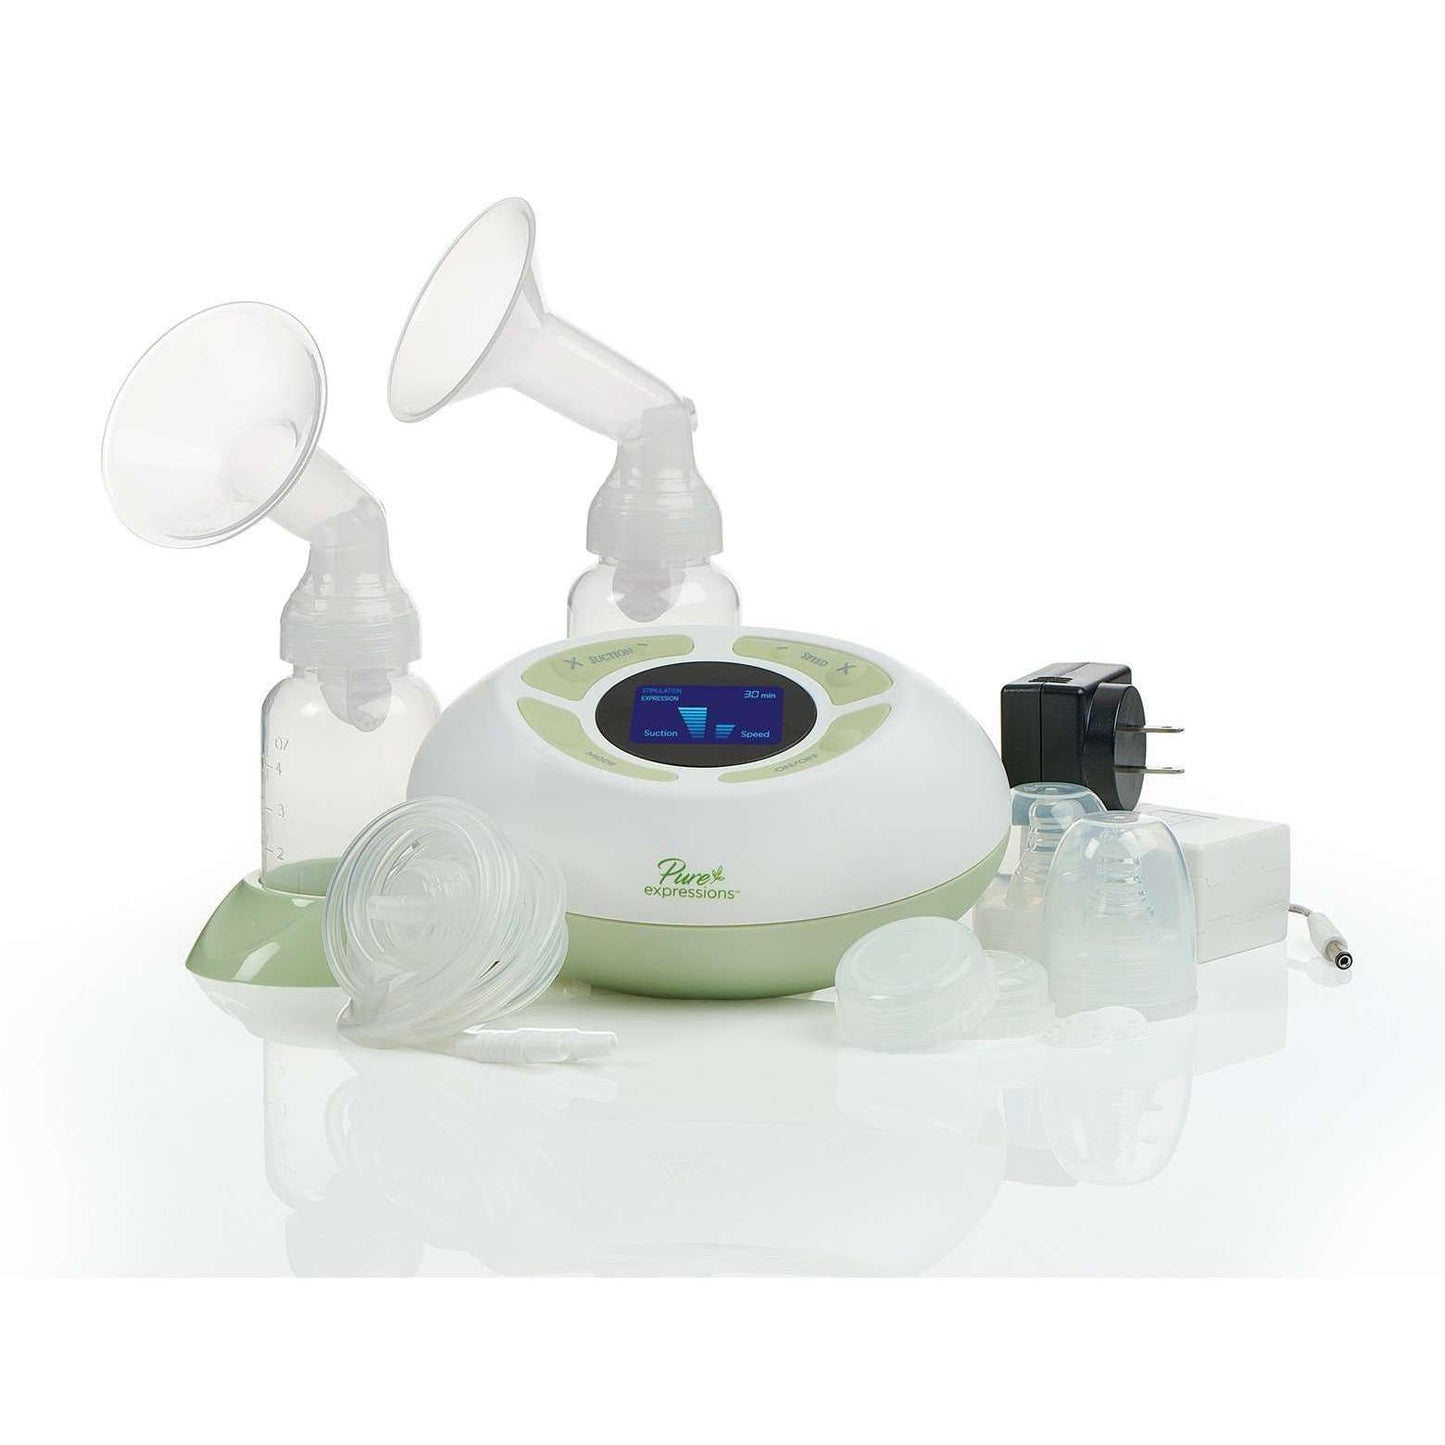 Drive Pure Expressions Economy Dual Channel Electric  Breast Pump, rtlbp0200